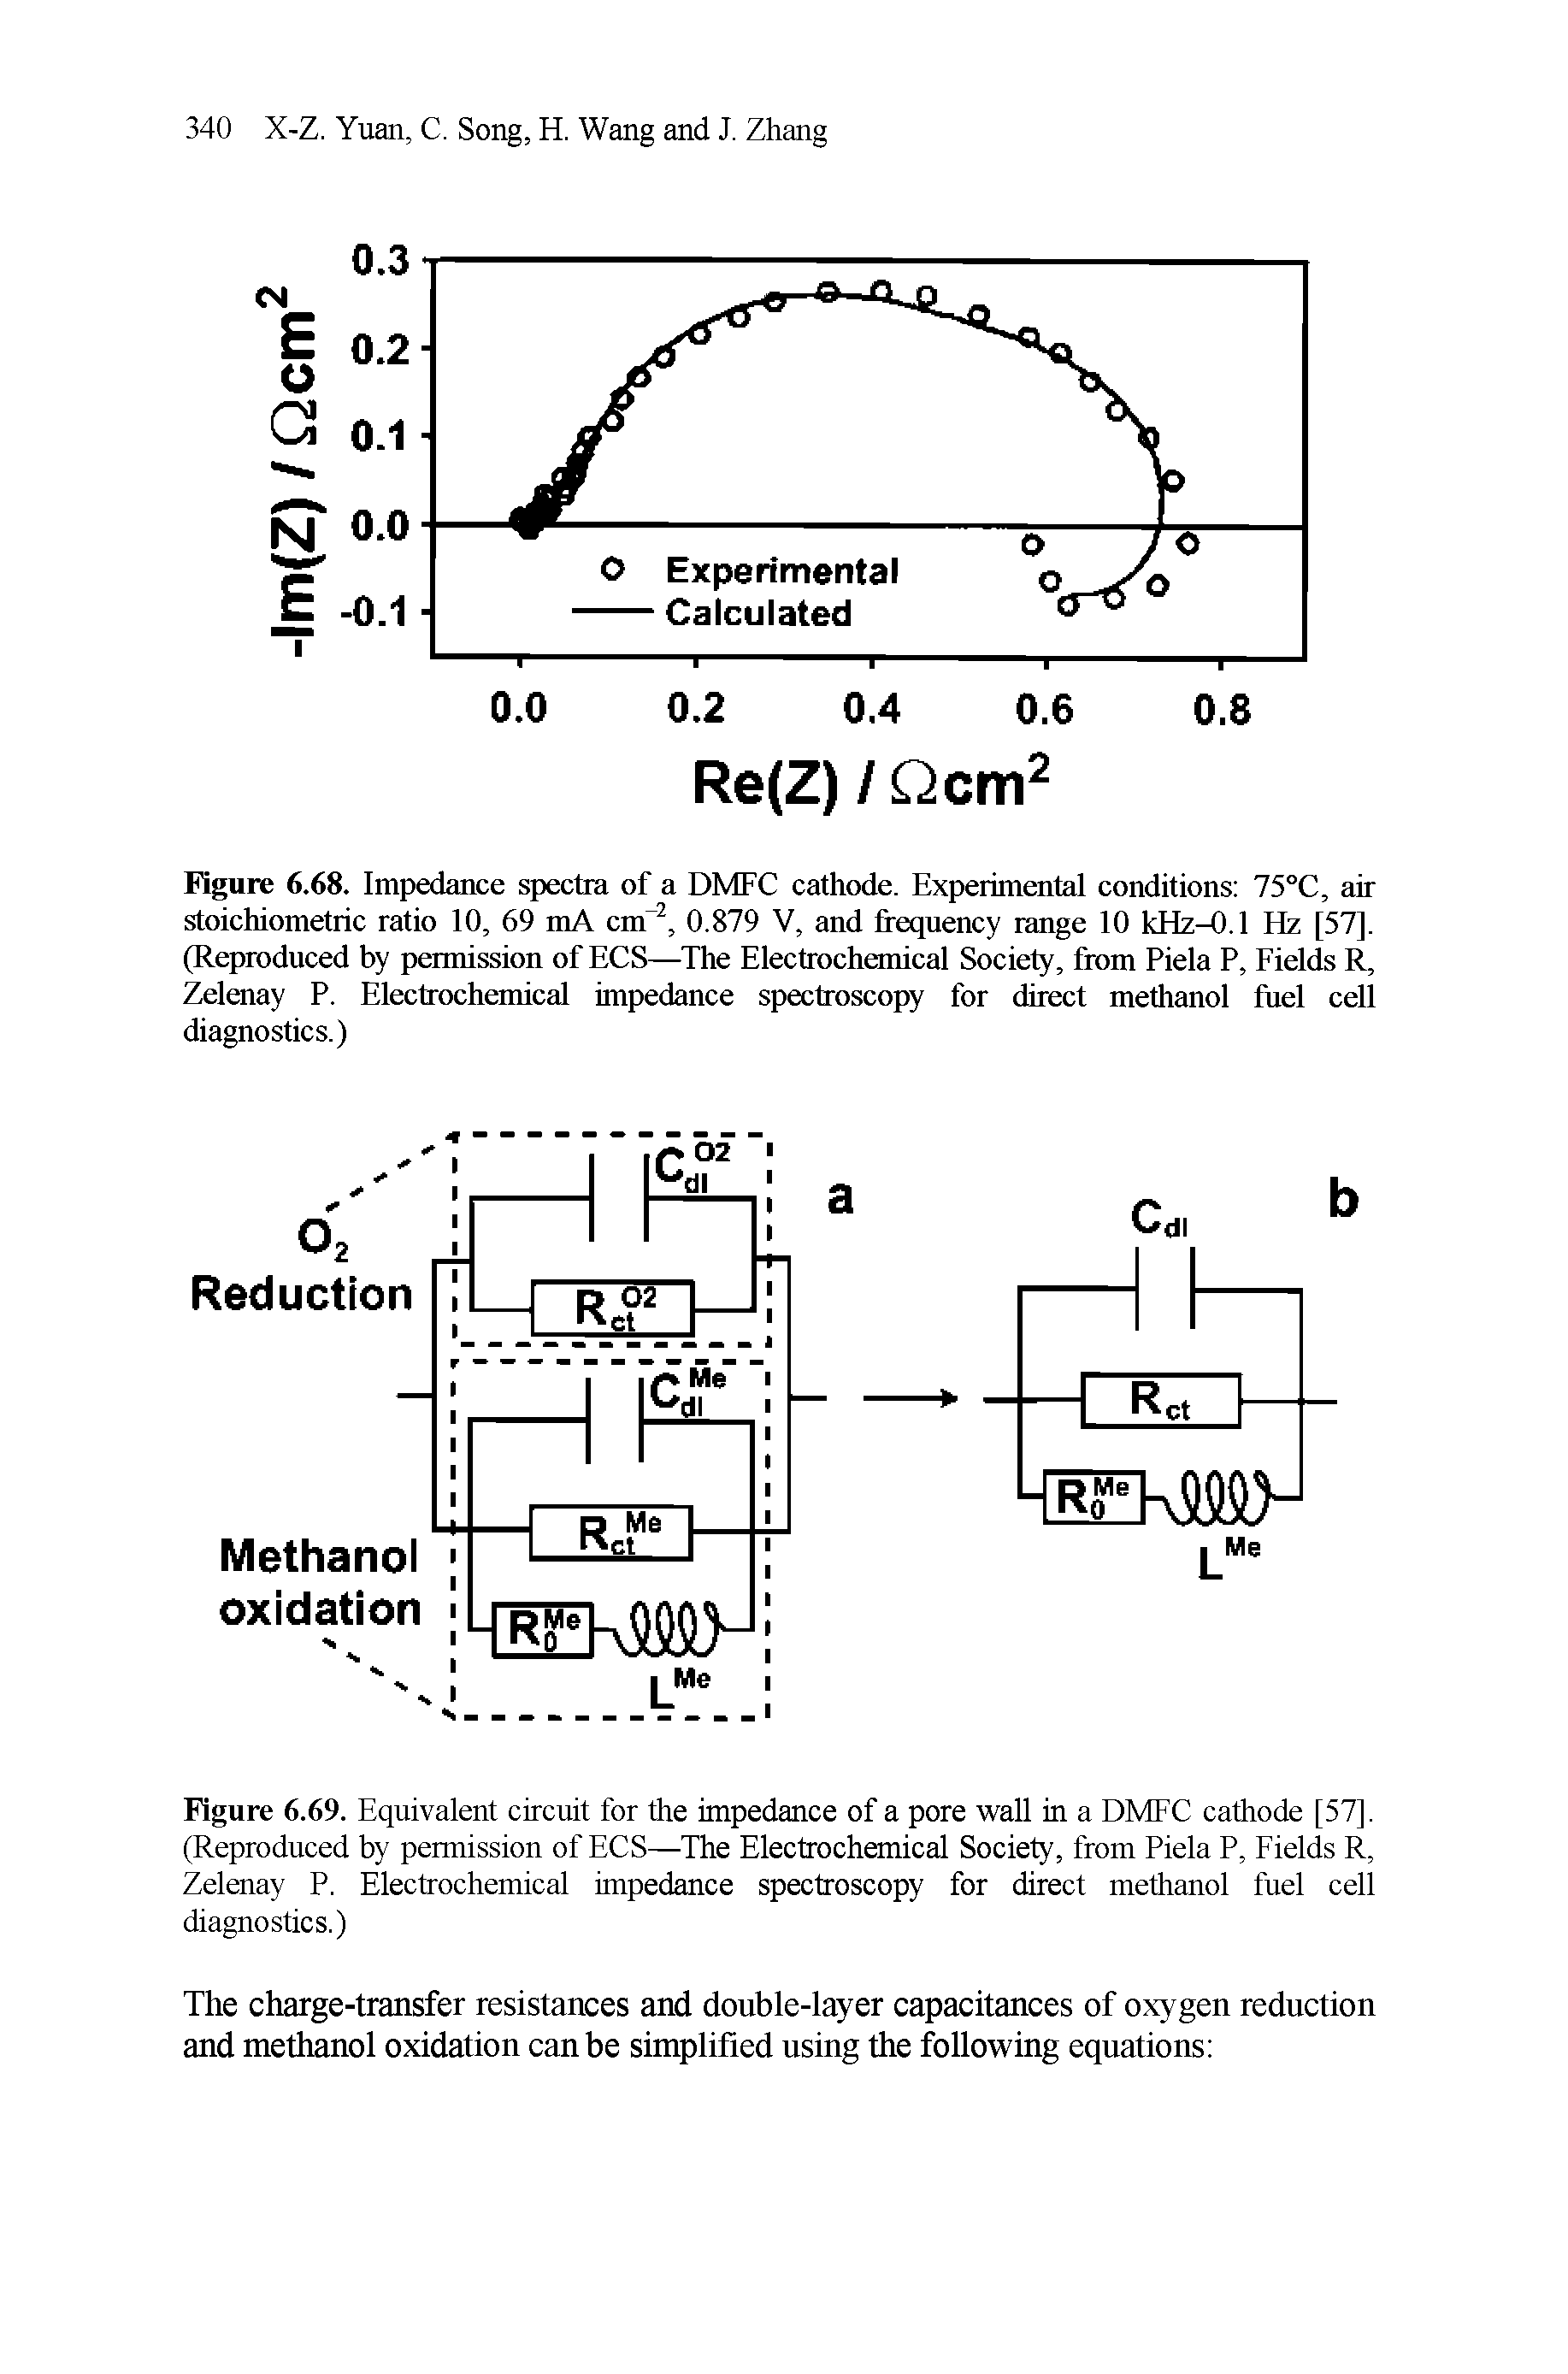 Figure 6.69. Equivalent circuit for the impedance of a pore wall in a DMFC cathode [57], (Reproduced by permission of ECS—The Electrochemical Society, from Piela P, Fields R, Zelenay P. Electrochemical impedance spectroscopy for direct methanol fuel cell diagnostics.)...